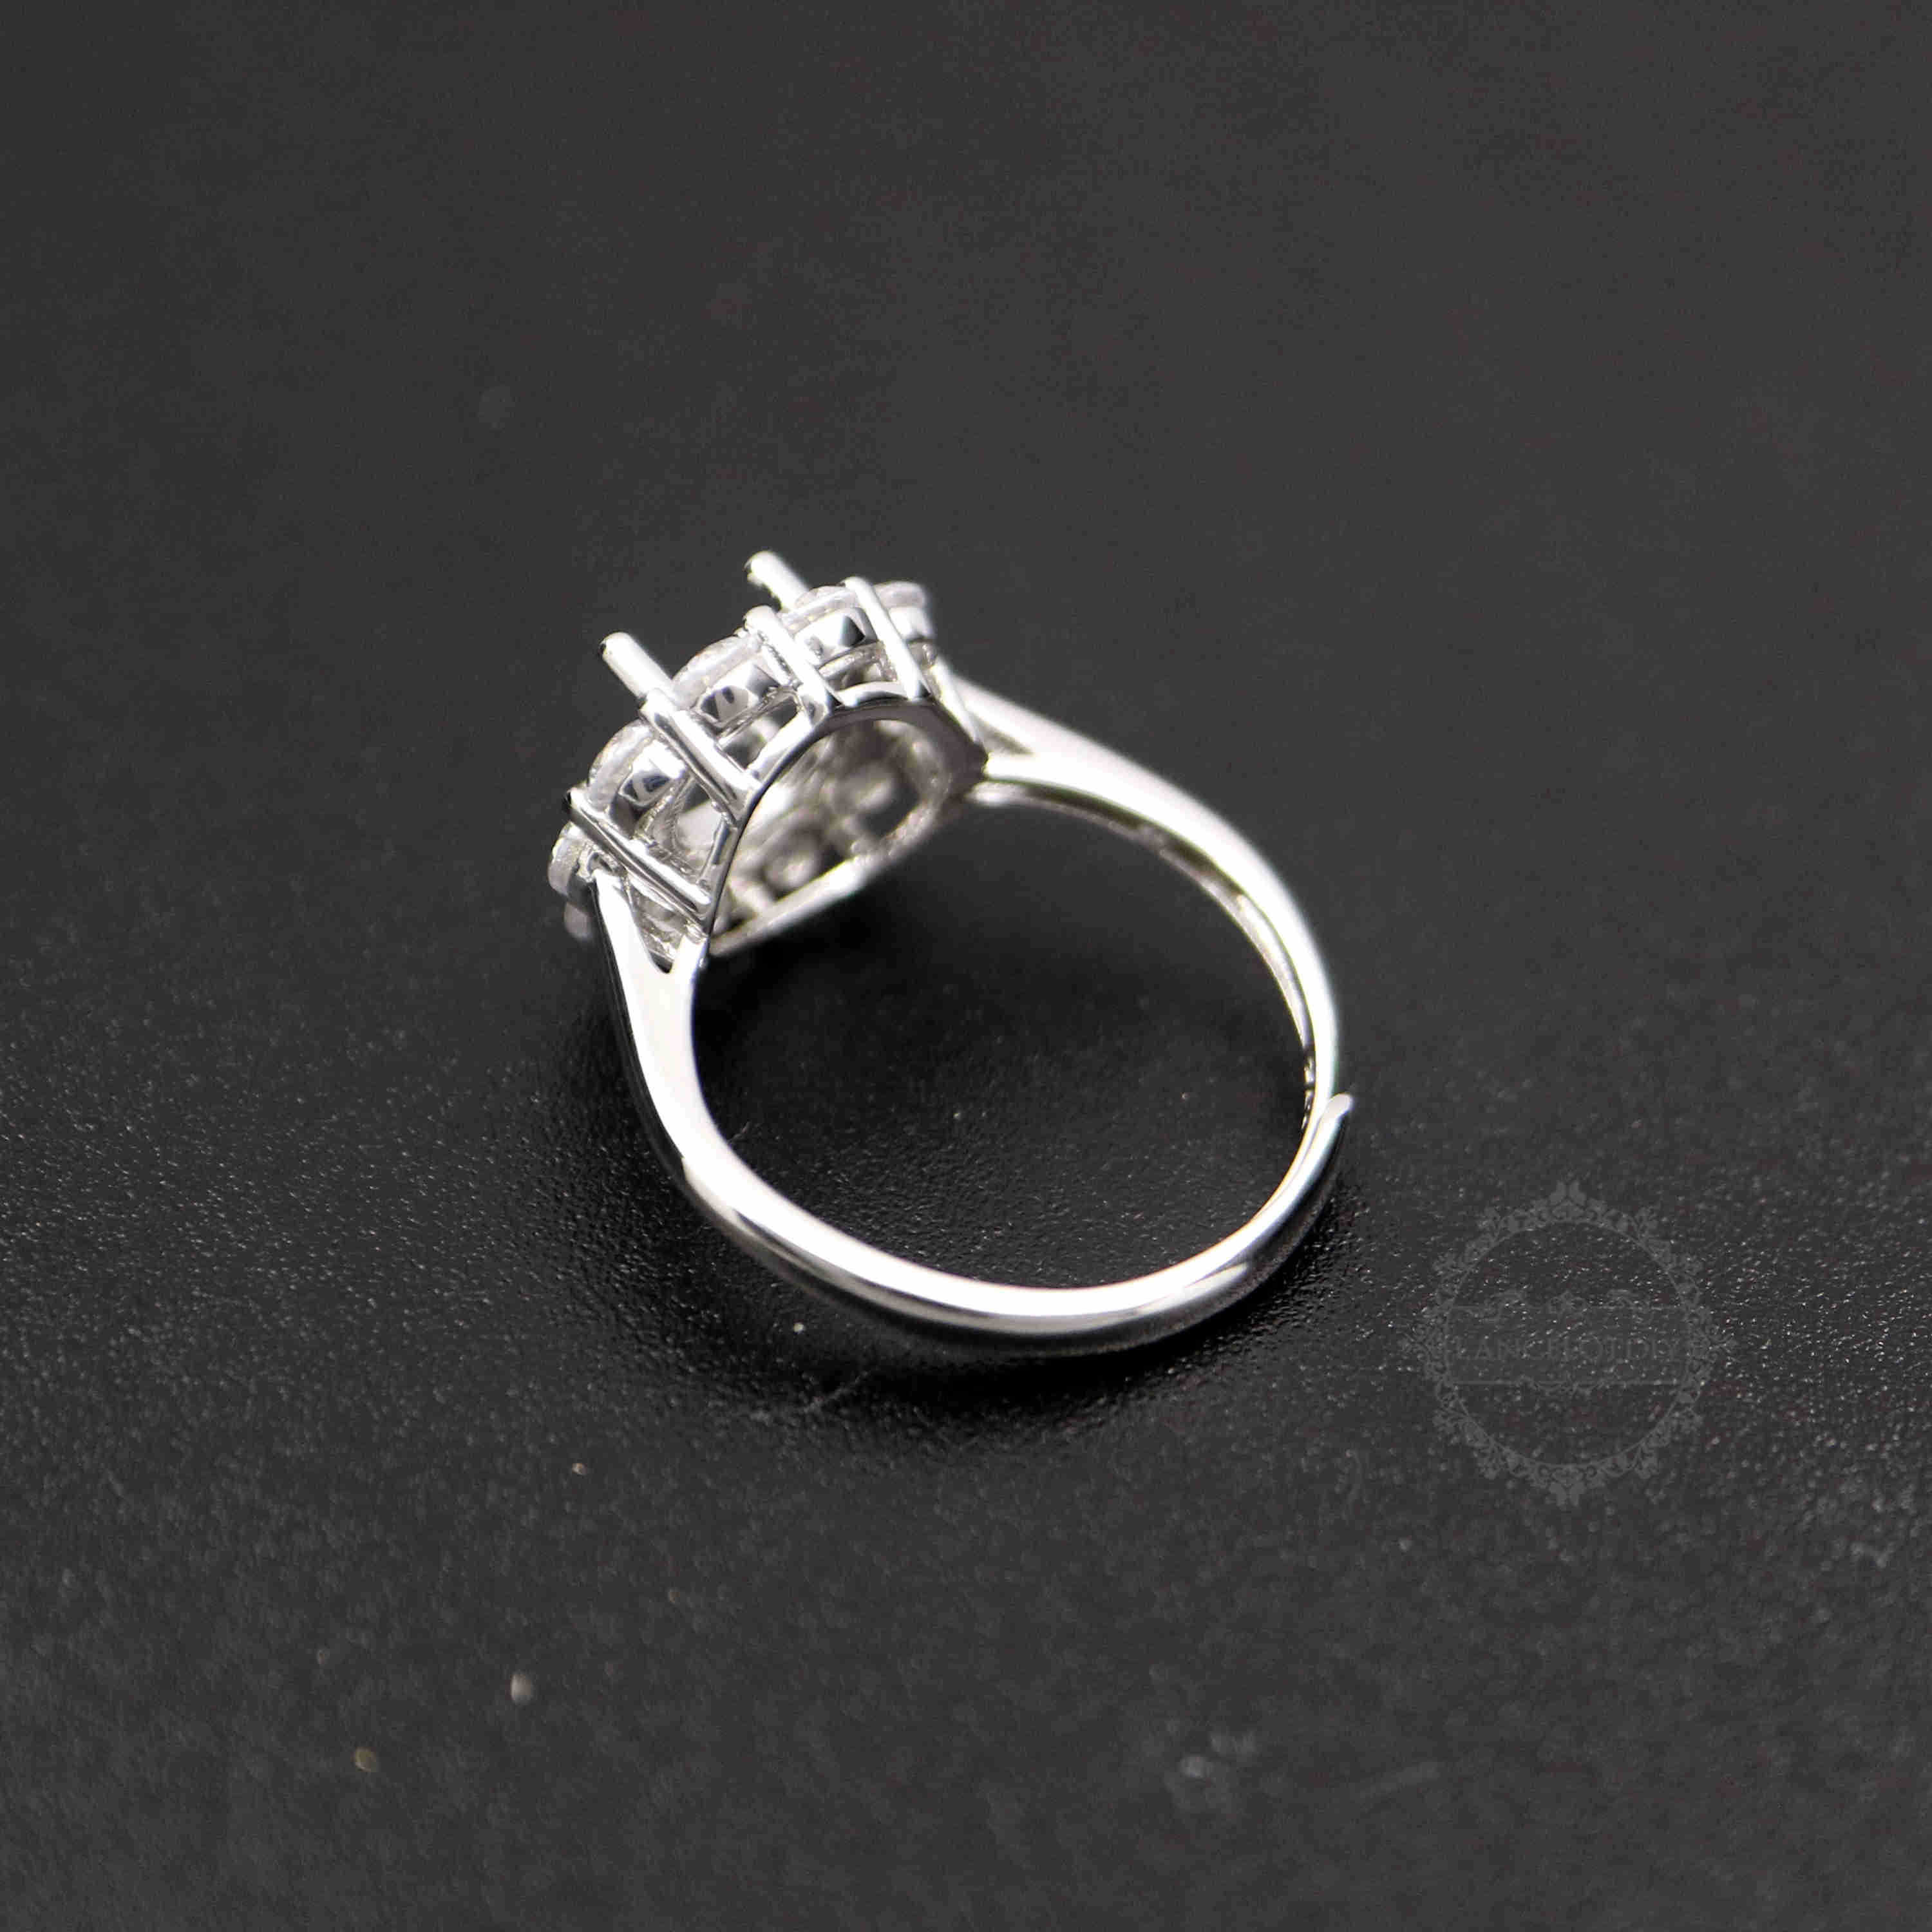 1Pcs 4-8MM Round Flower Silver Gems Cz Stone Prong Setting Solid 925 Sterling Silver Bezel Tray DIY Adjustable Ring Settings 1212046 - Click Image to Close